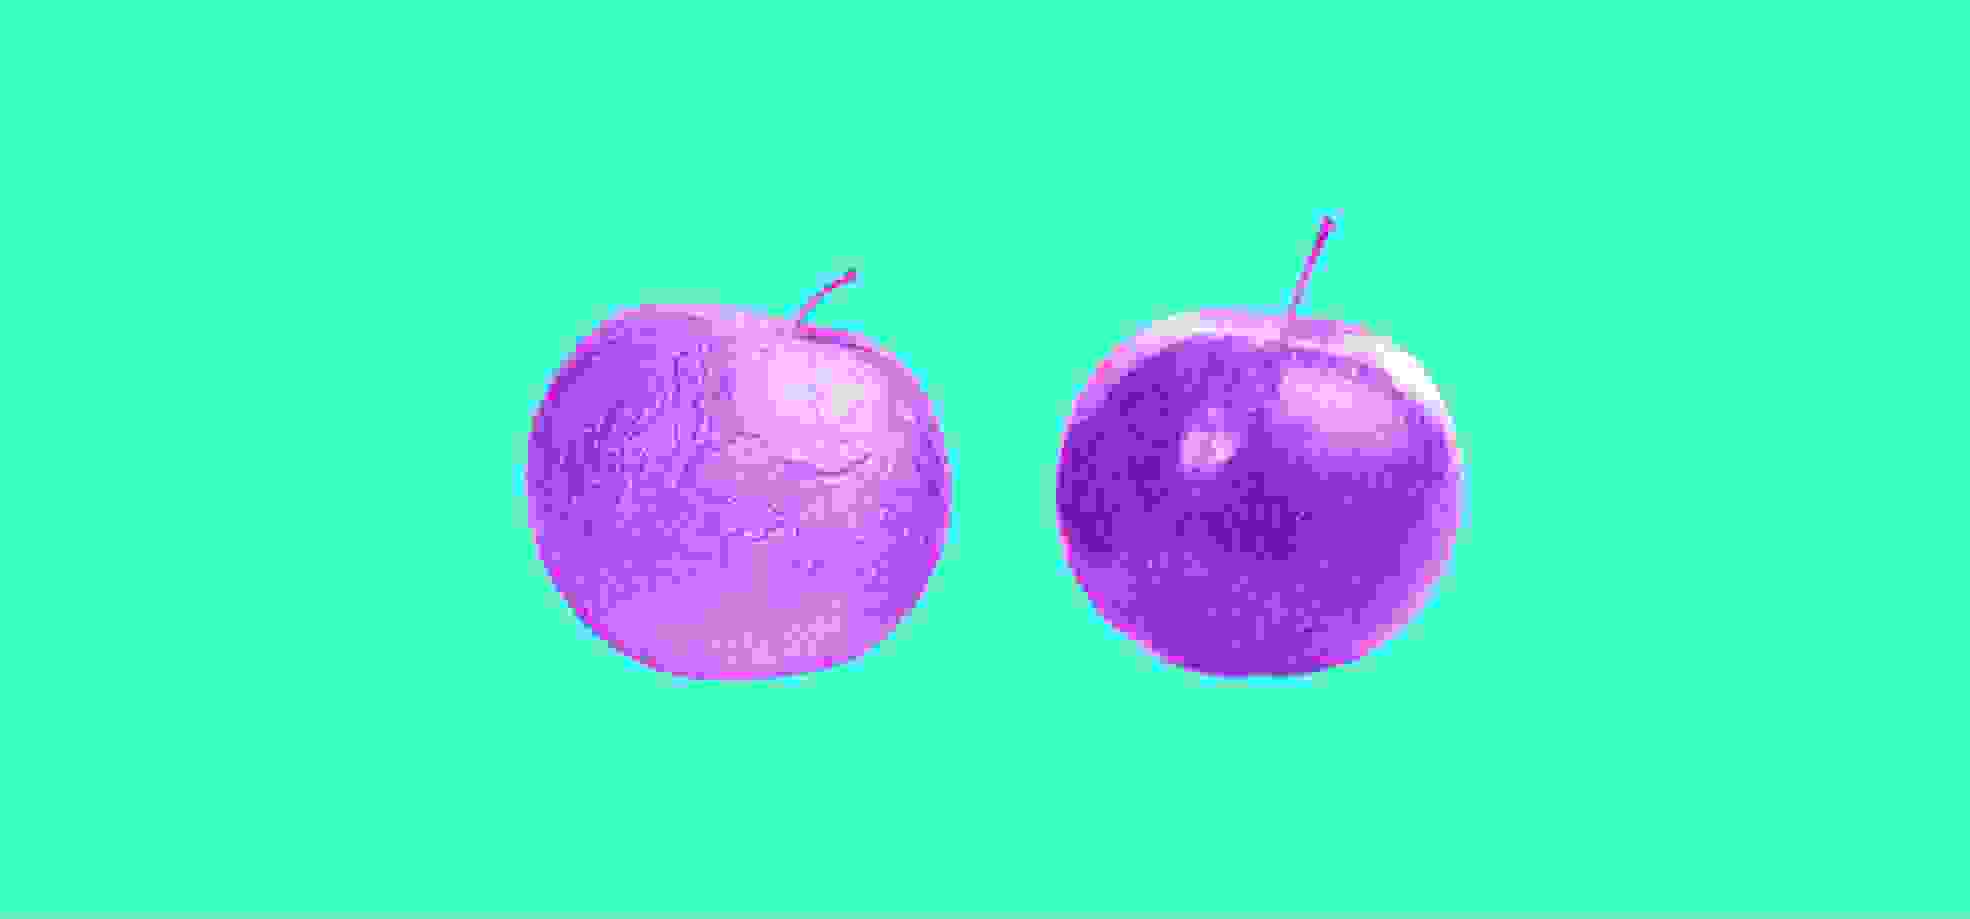 two apples on green background